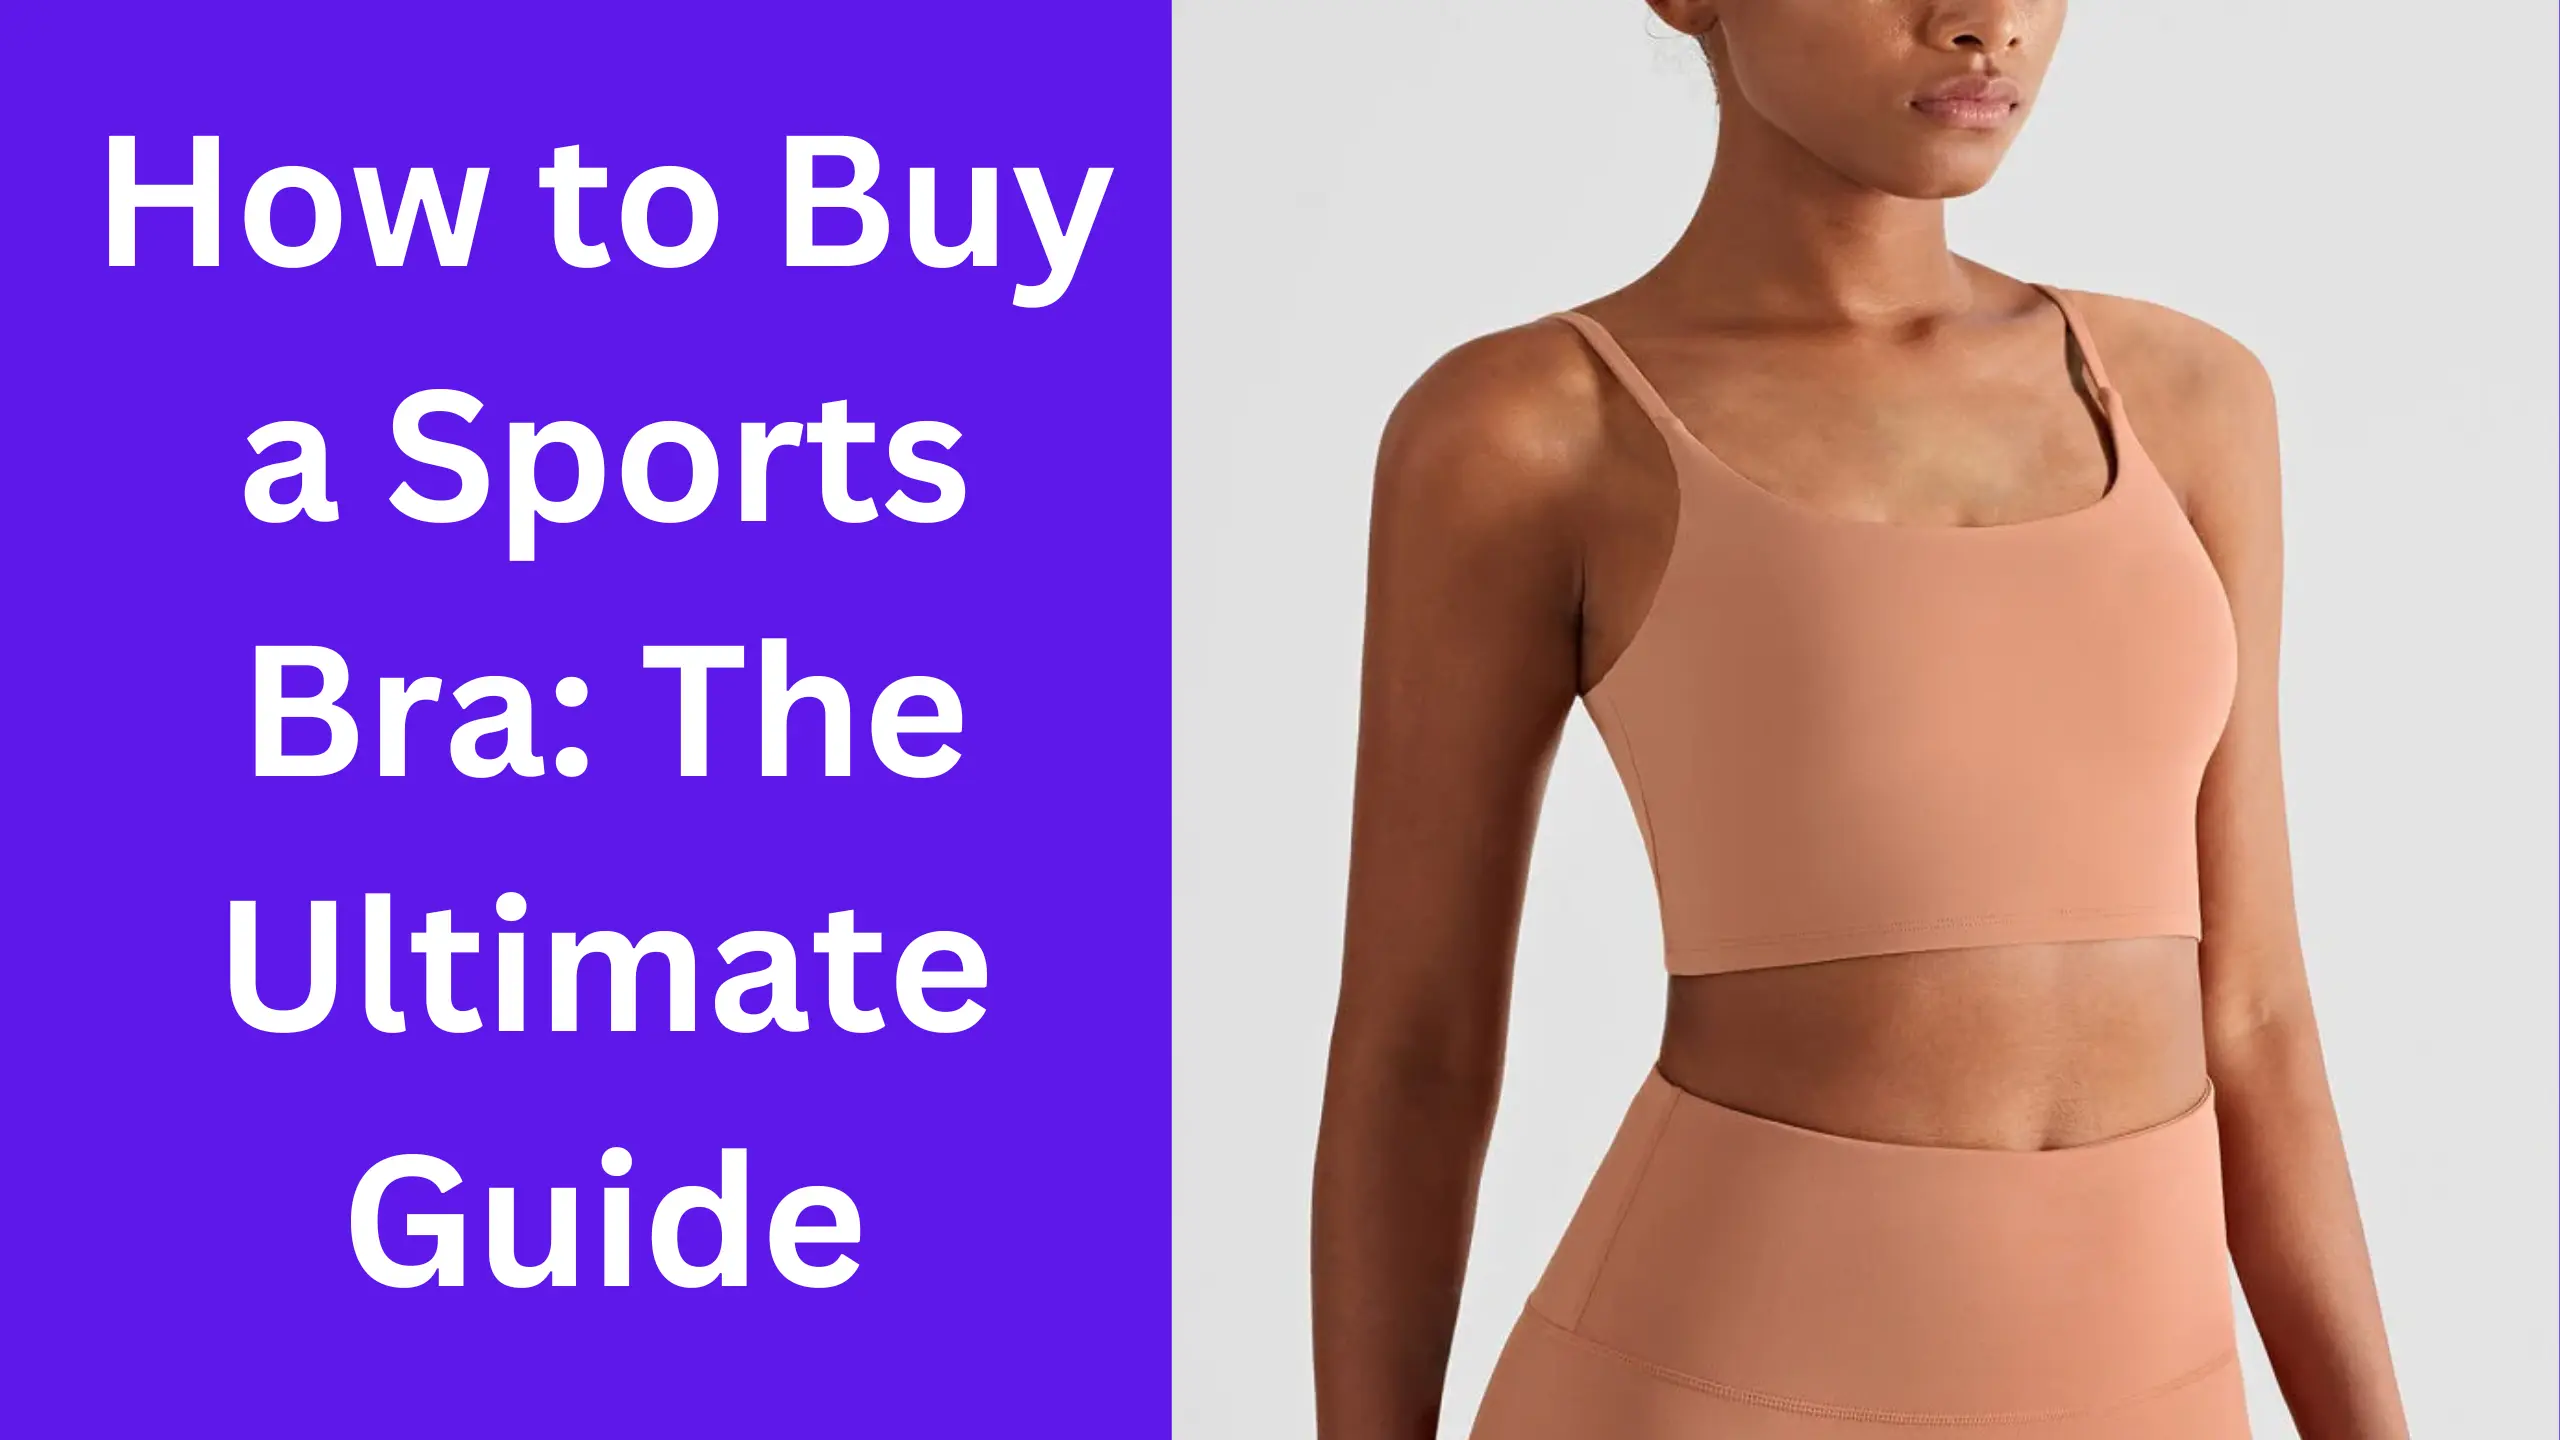 How to Buy a Sports Bra The Ultimate Guide